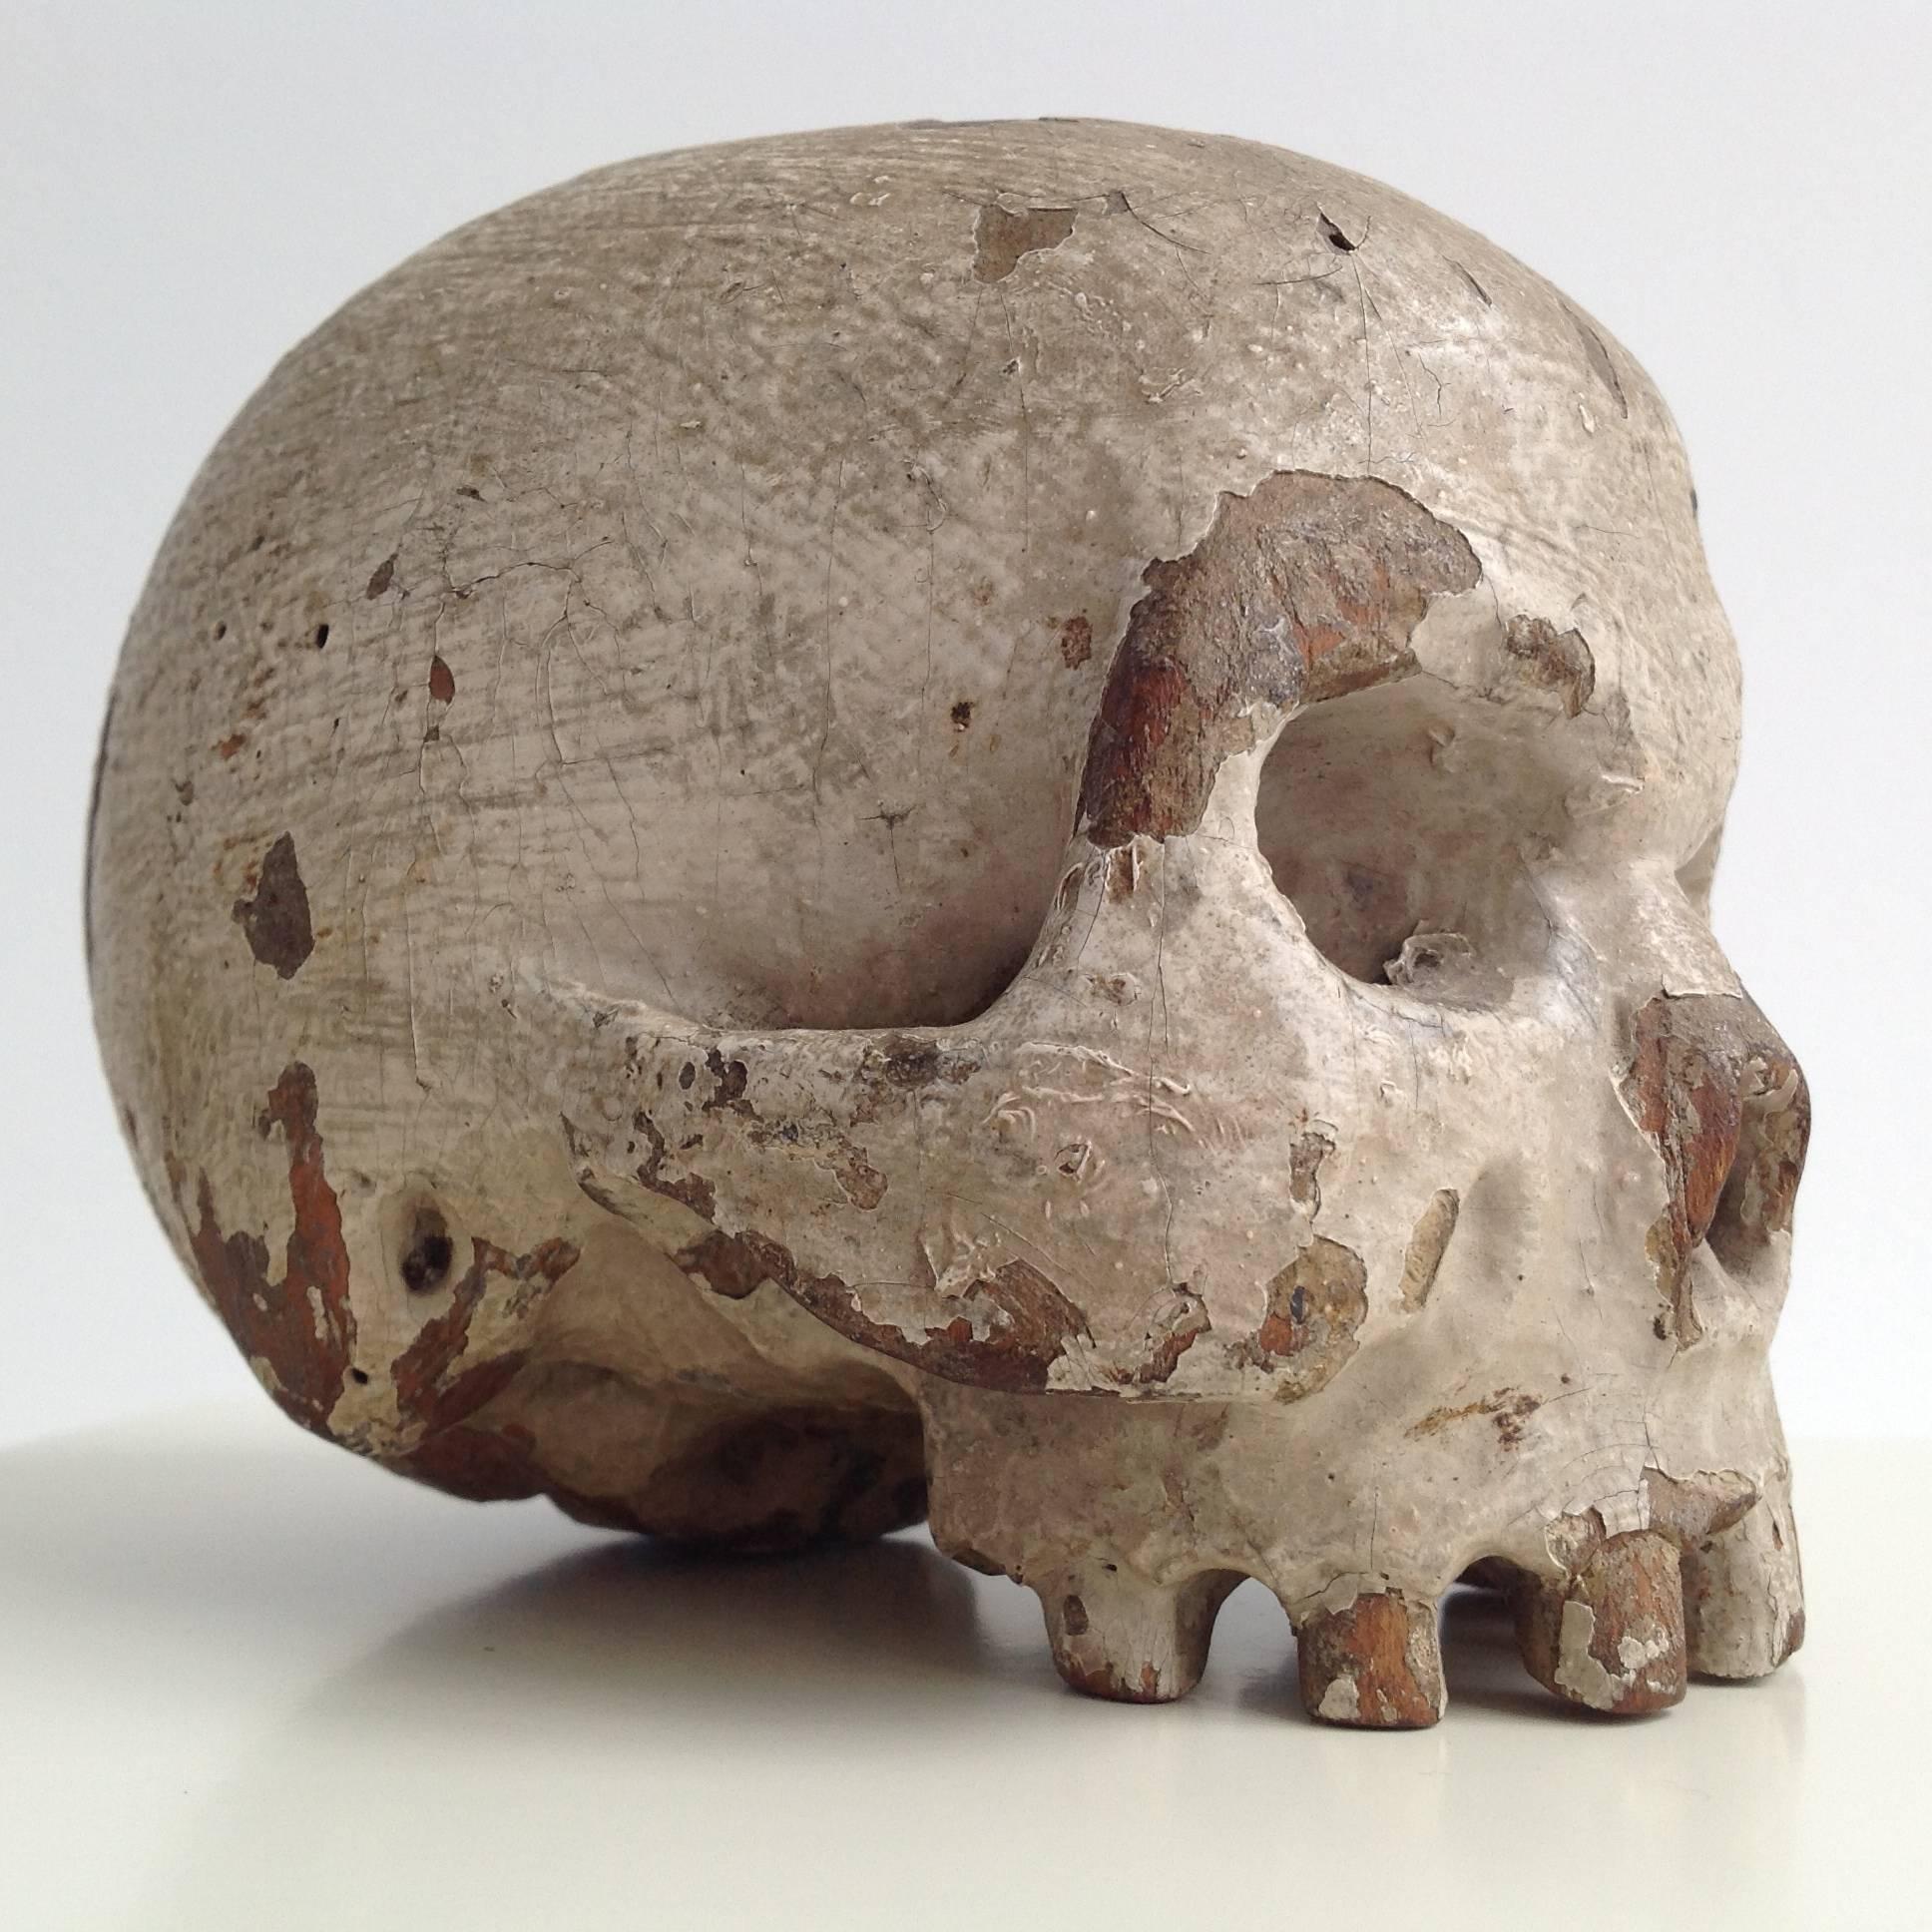 Extremely rare little skull of solid wood from the 18th century.
Beautiful and realistic handmade piece of art, stunning decoration.
It's a piece from a private collection, the origin is never outdated.
It suggests that it comes from a very old